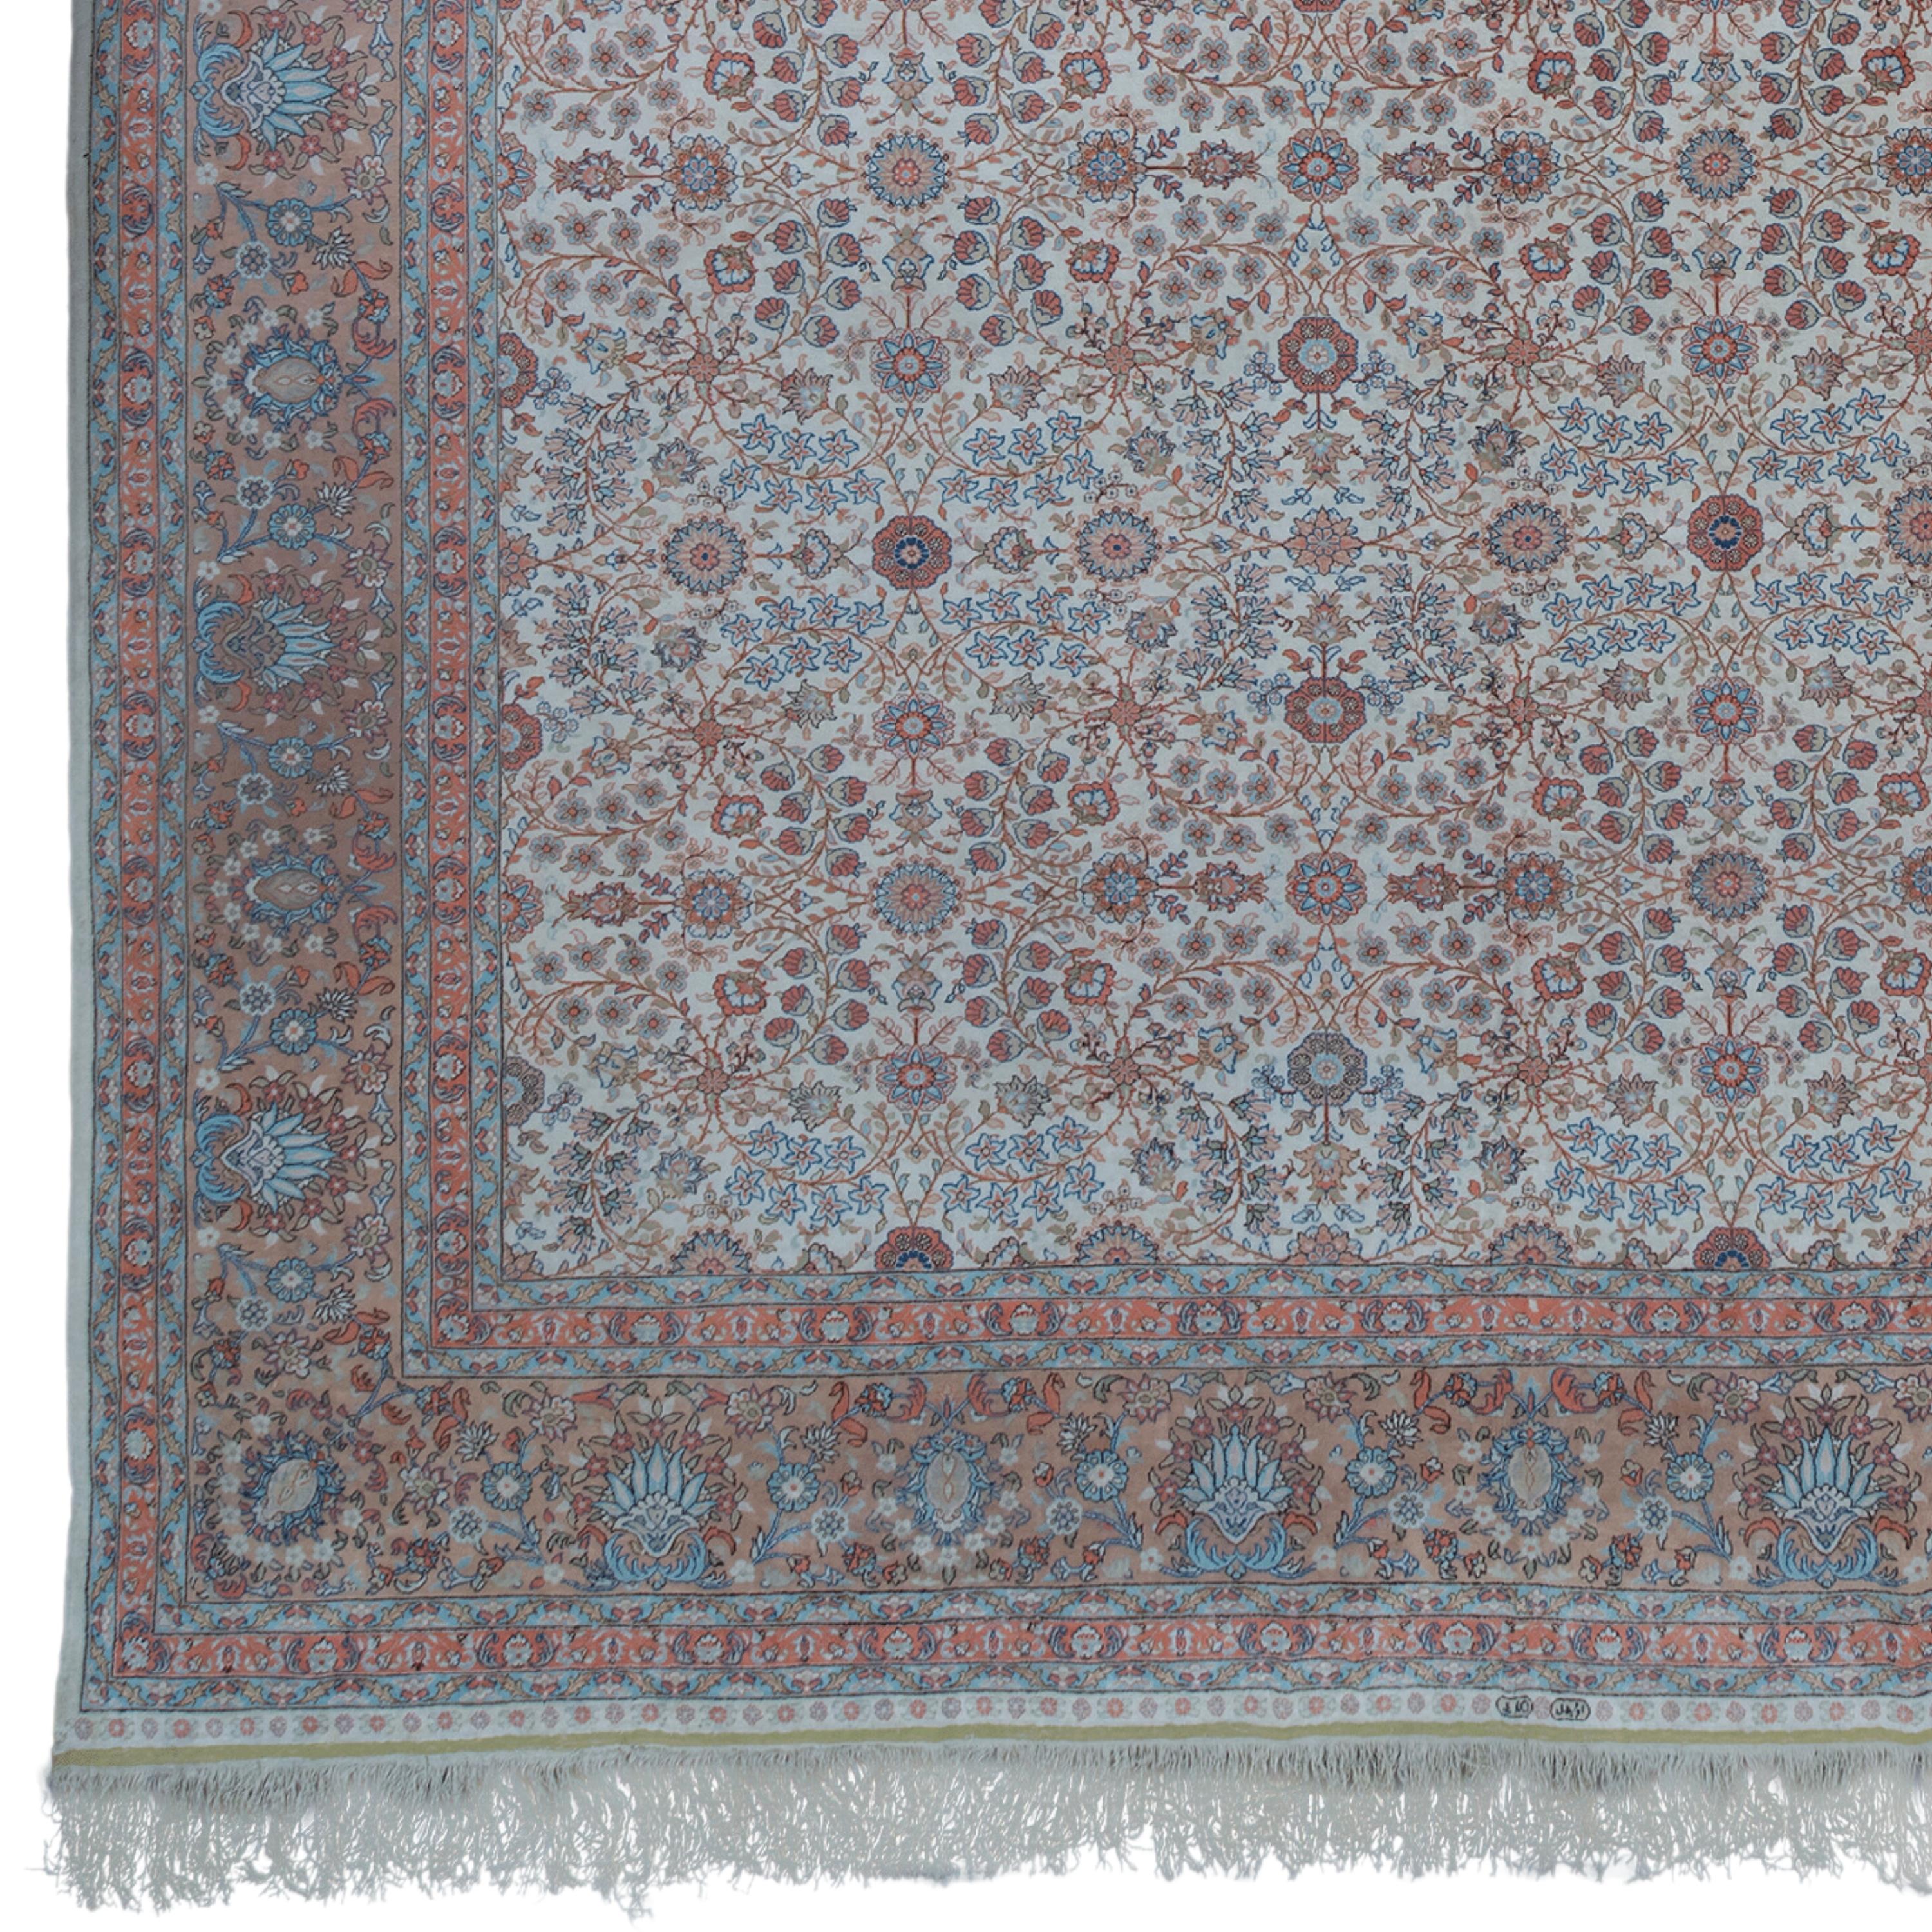 20th Century Kayseri Silk Carpet - Vintage Turkish Silk Carpet

This 20th century antique silk Kayseri rug dazzles with its rich color palette and intricate patterns. This carpet, dominated by shades of blue, red and beige, is full of intense